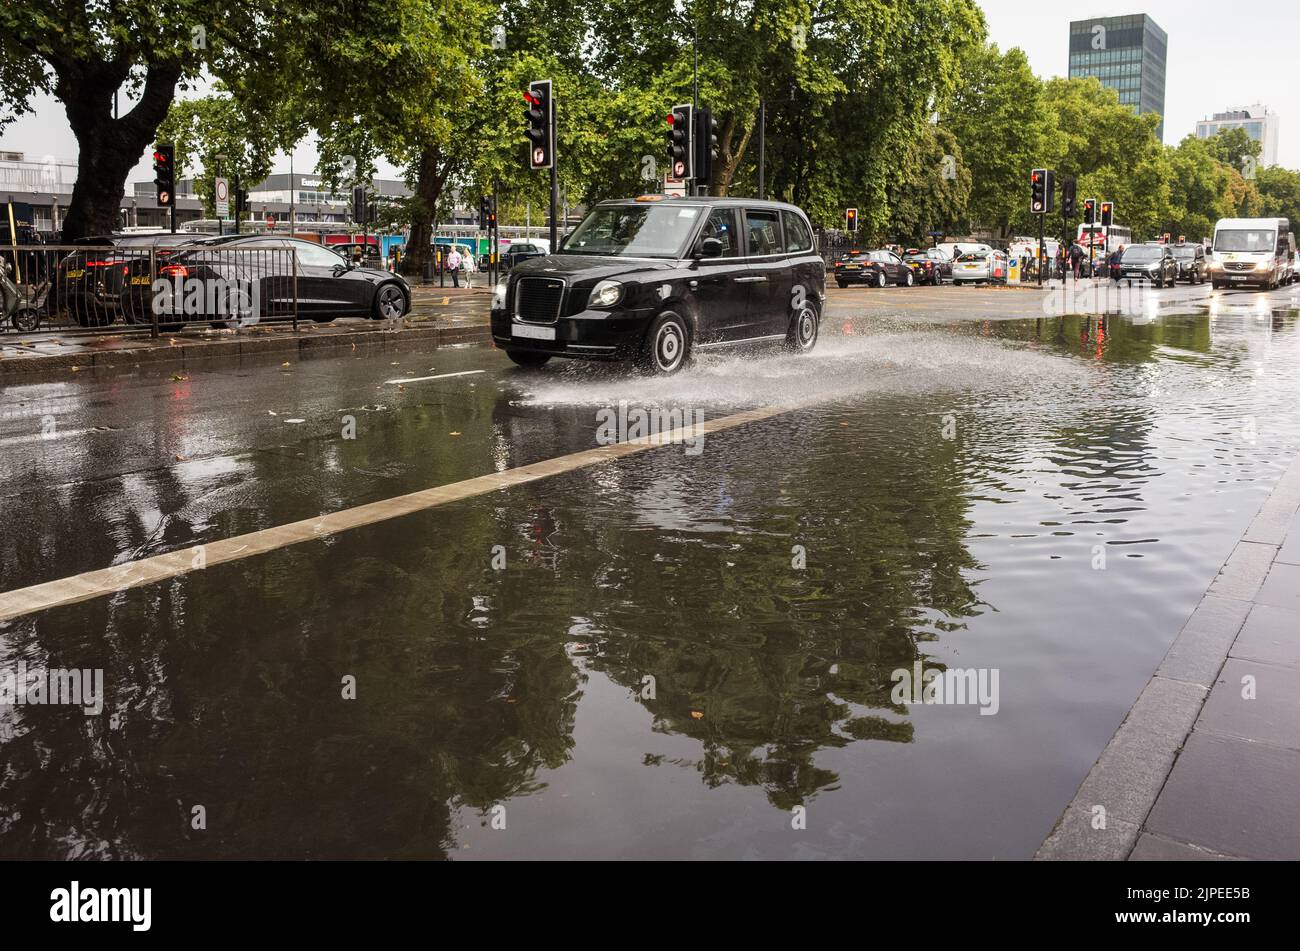 Car drives through flooded Euston Road in Central London after rain storm, England, UK, British Weather. Stock Photo